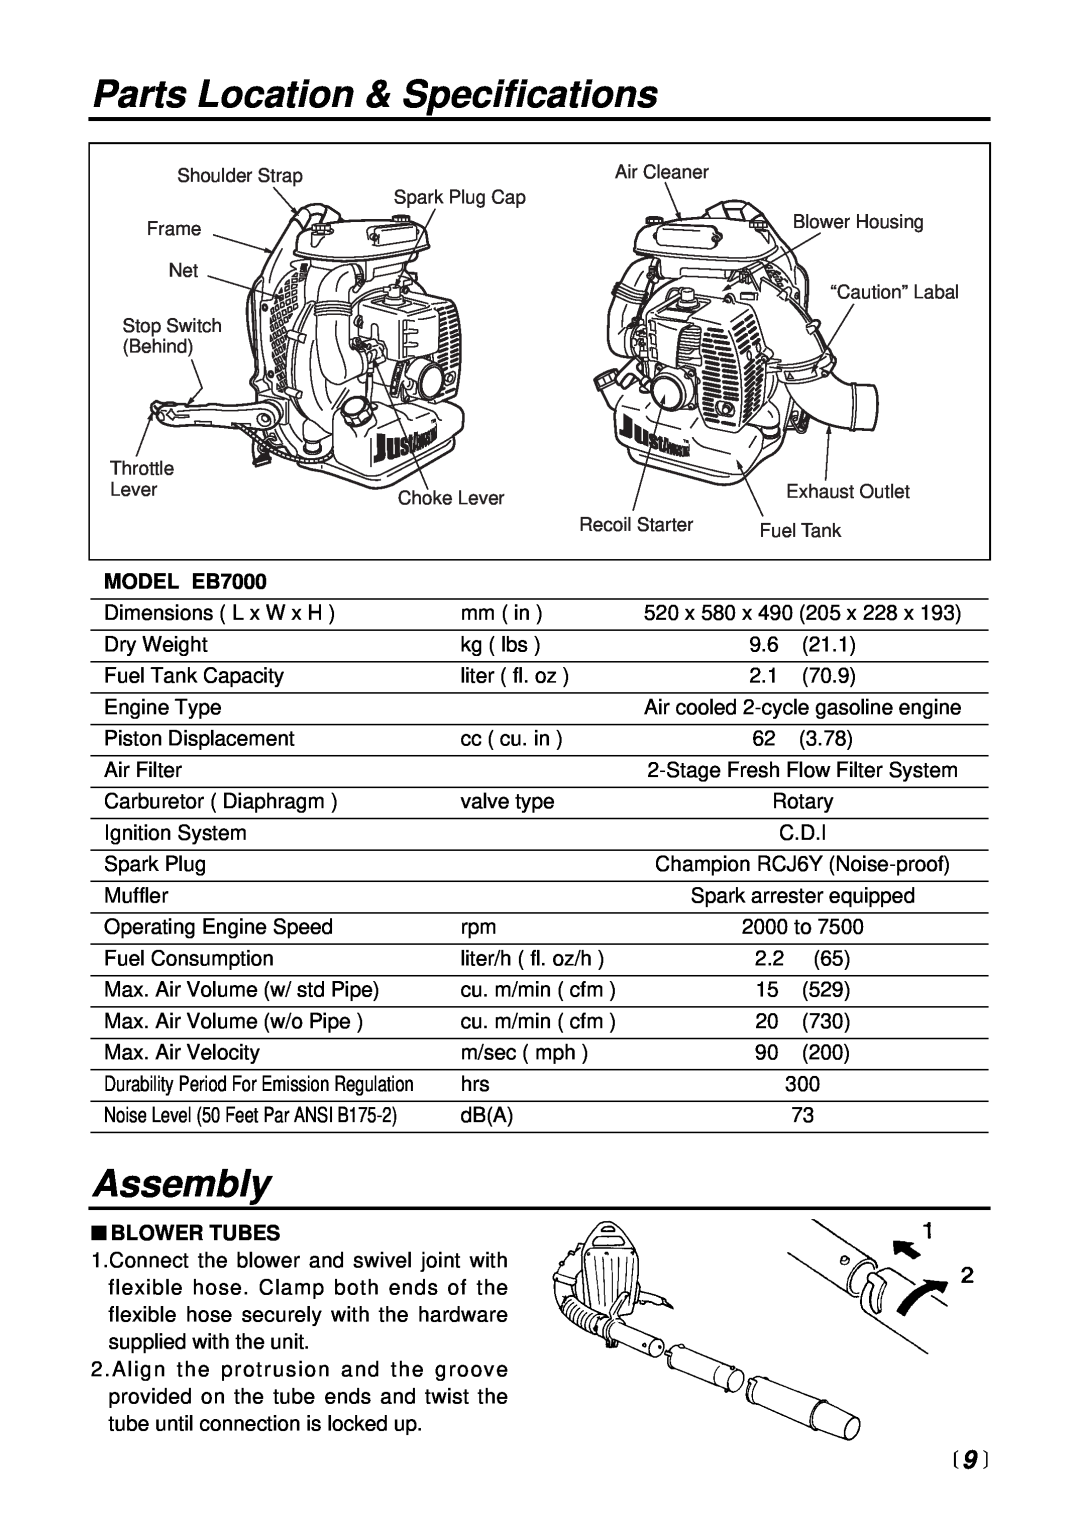 RedMax manual Parts Location & Specifications, Assembly,  9 , MODEL EB7000, Blower Tubes 